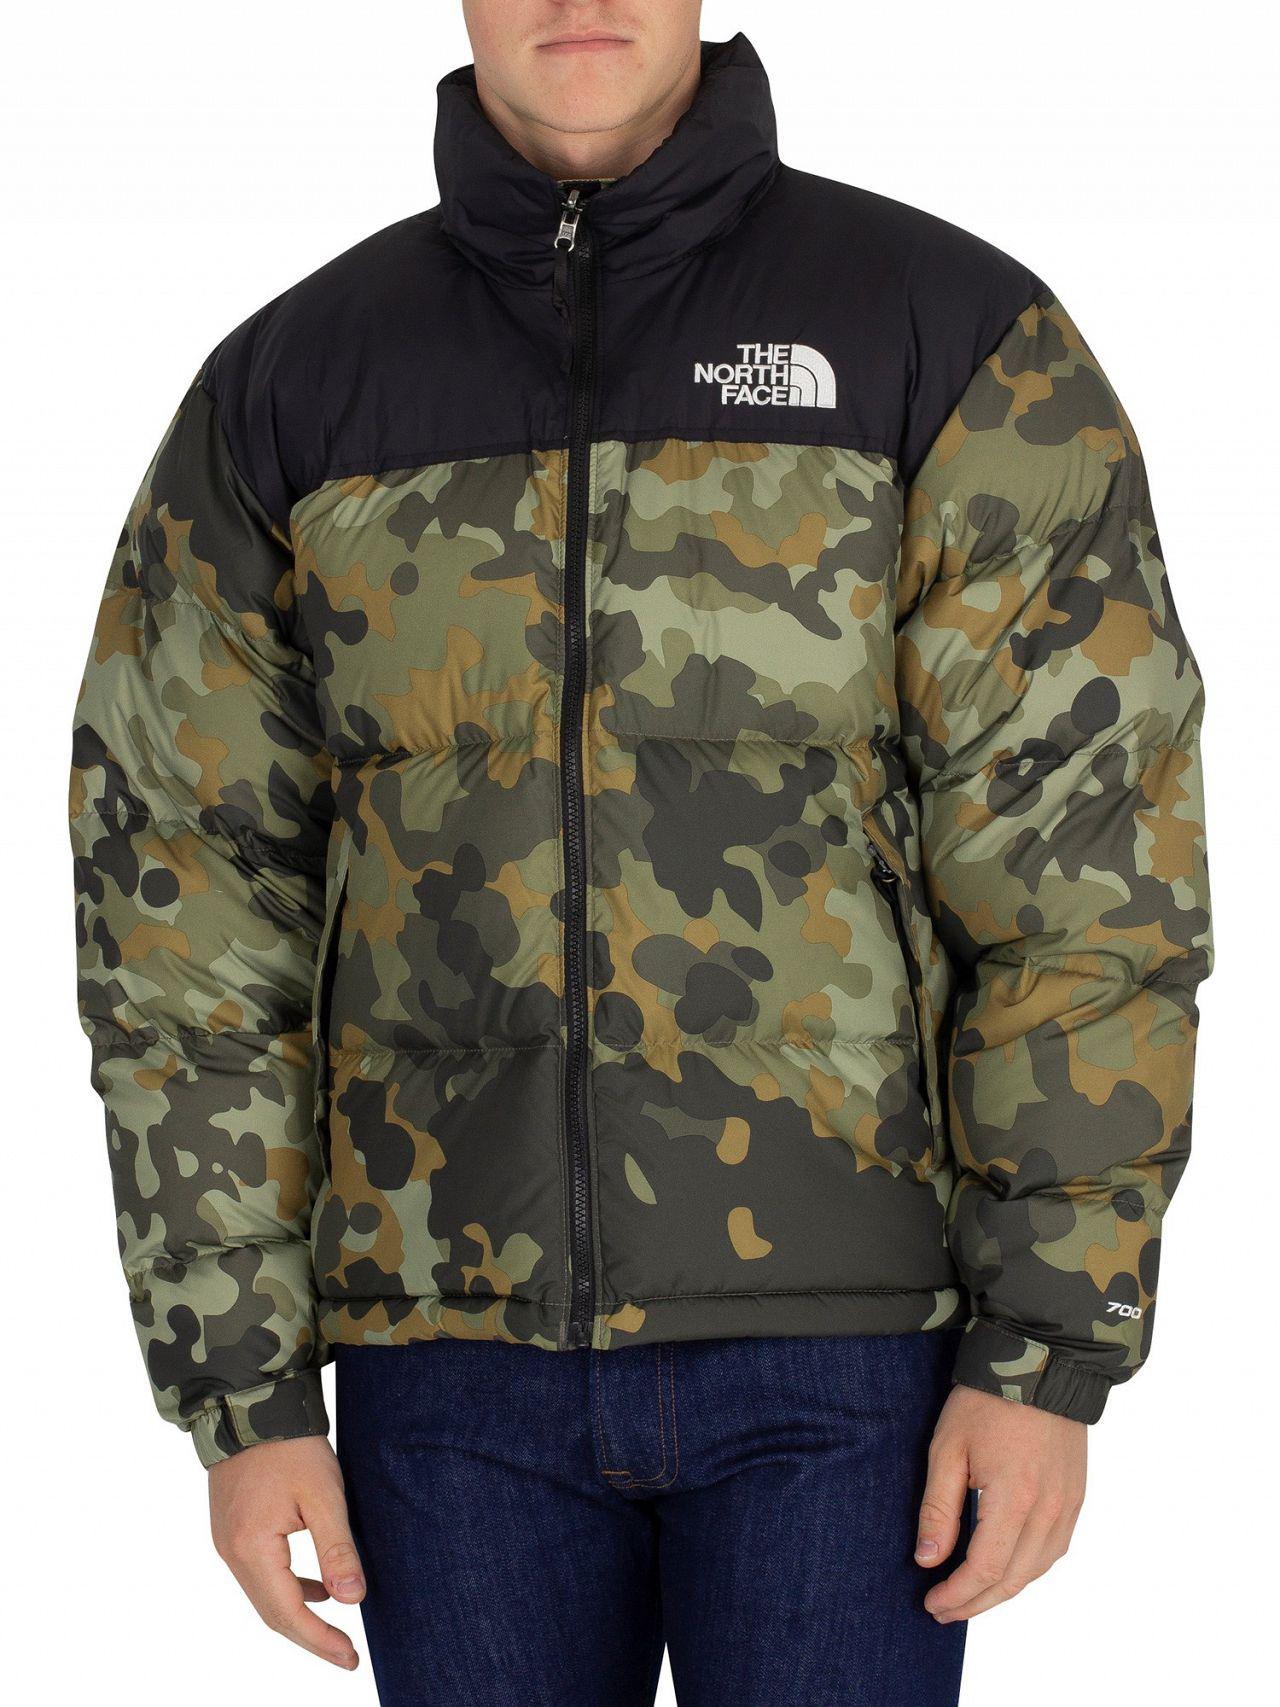 north face puffer jacket camo